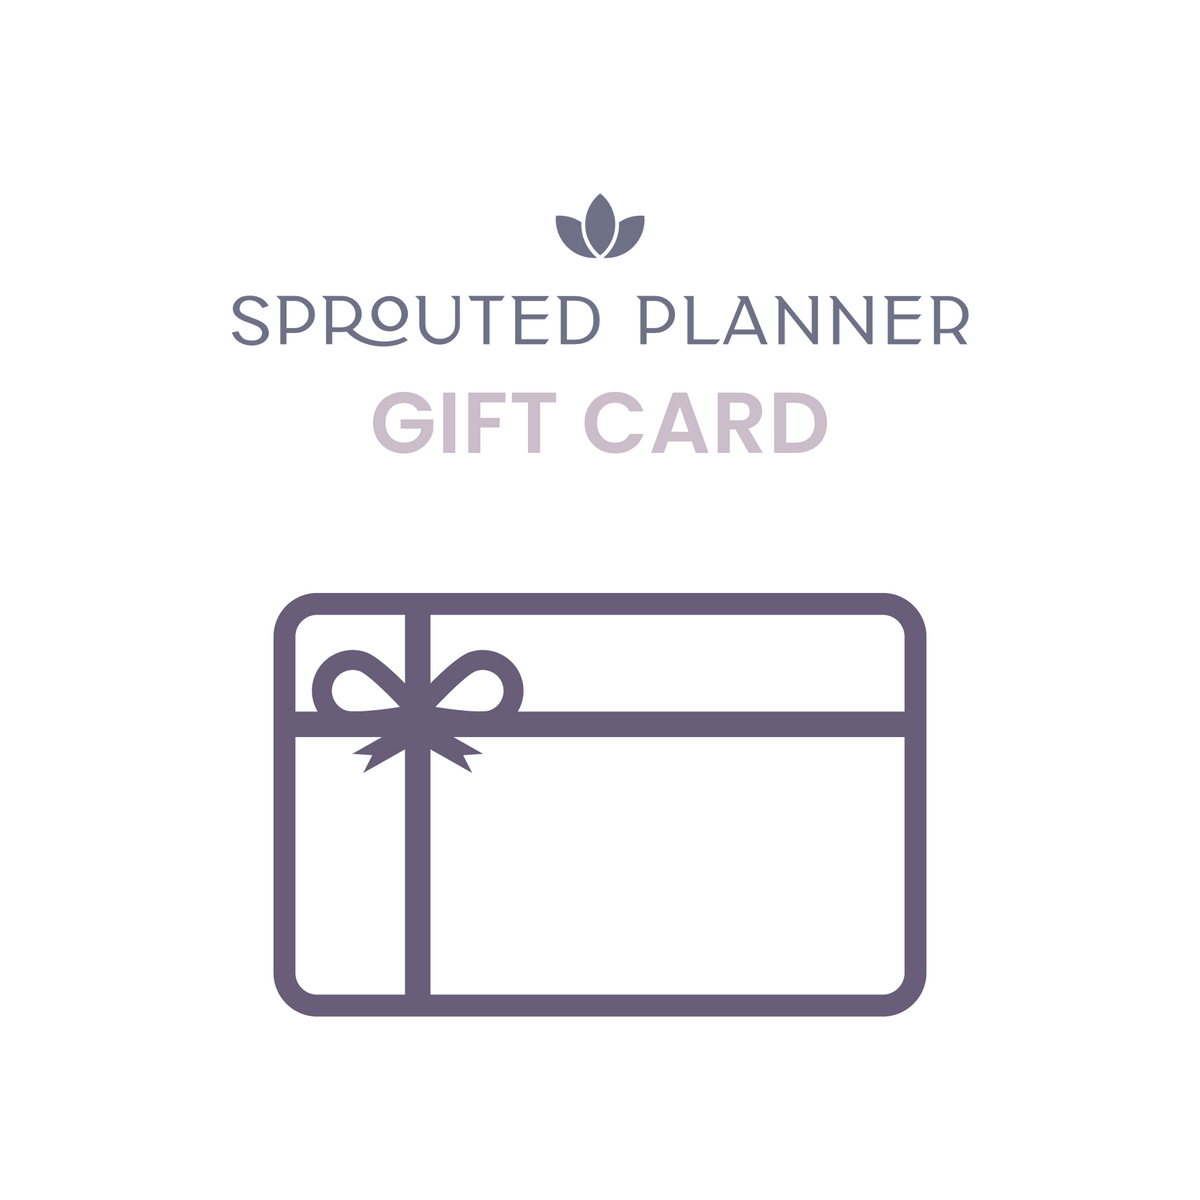 Sprouted Planner Gift Card